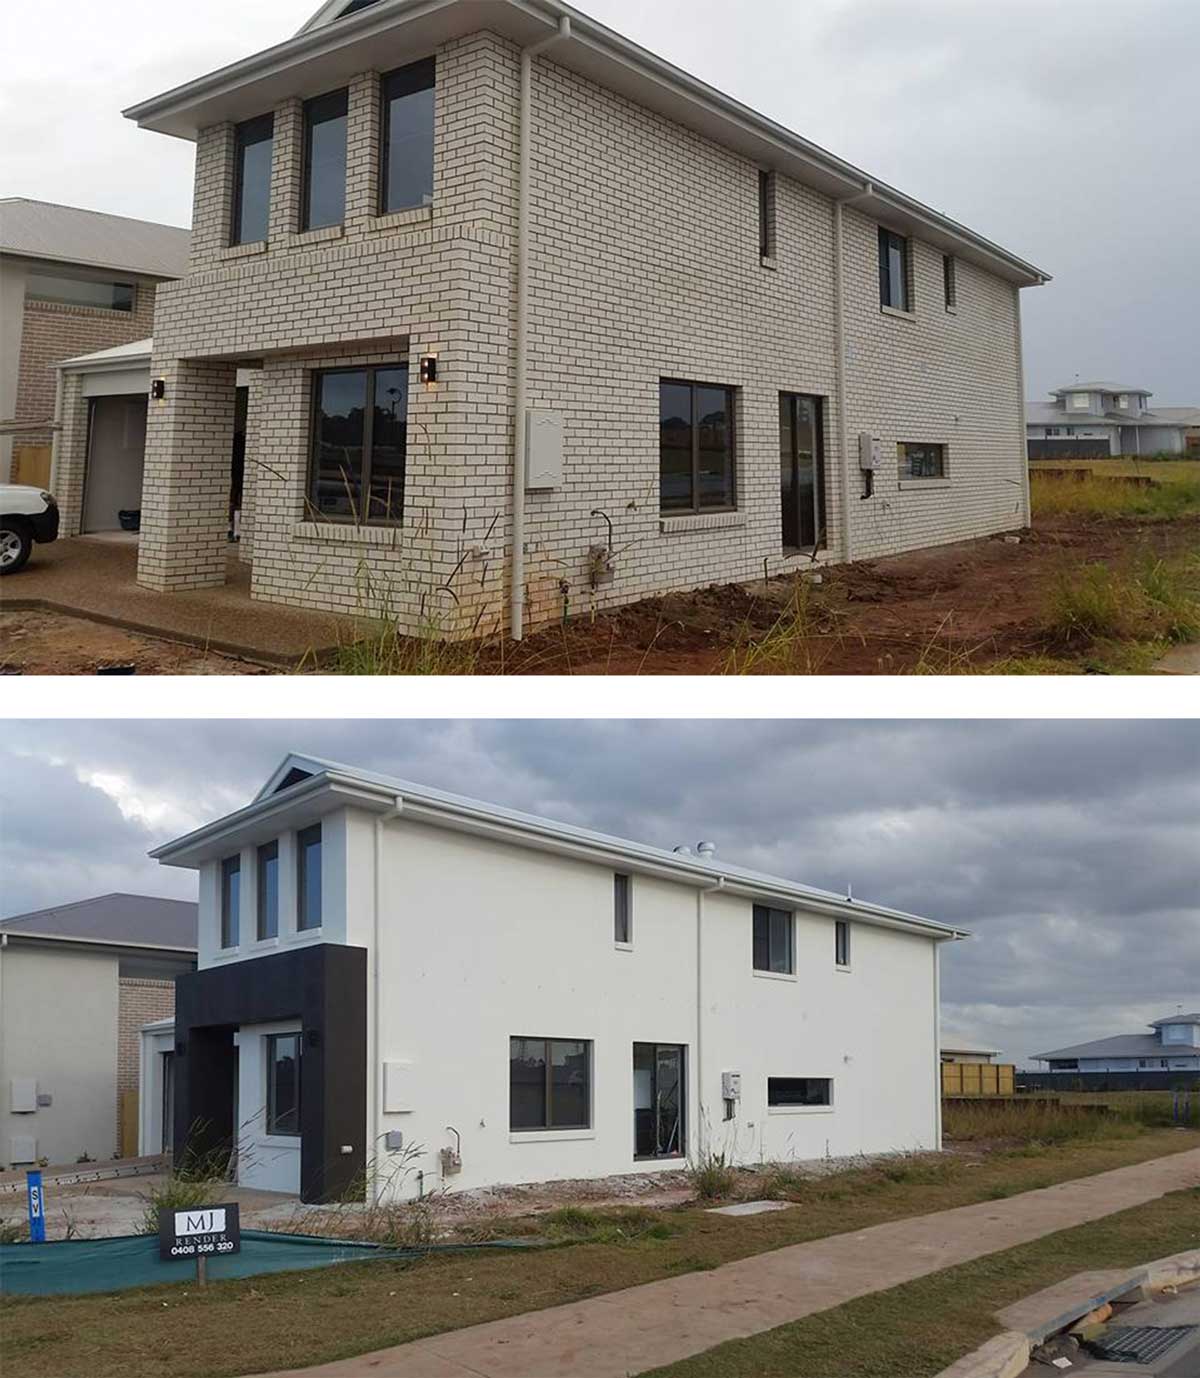 MJ Render Render and Paint, New Build, Buderim Qld